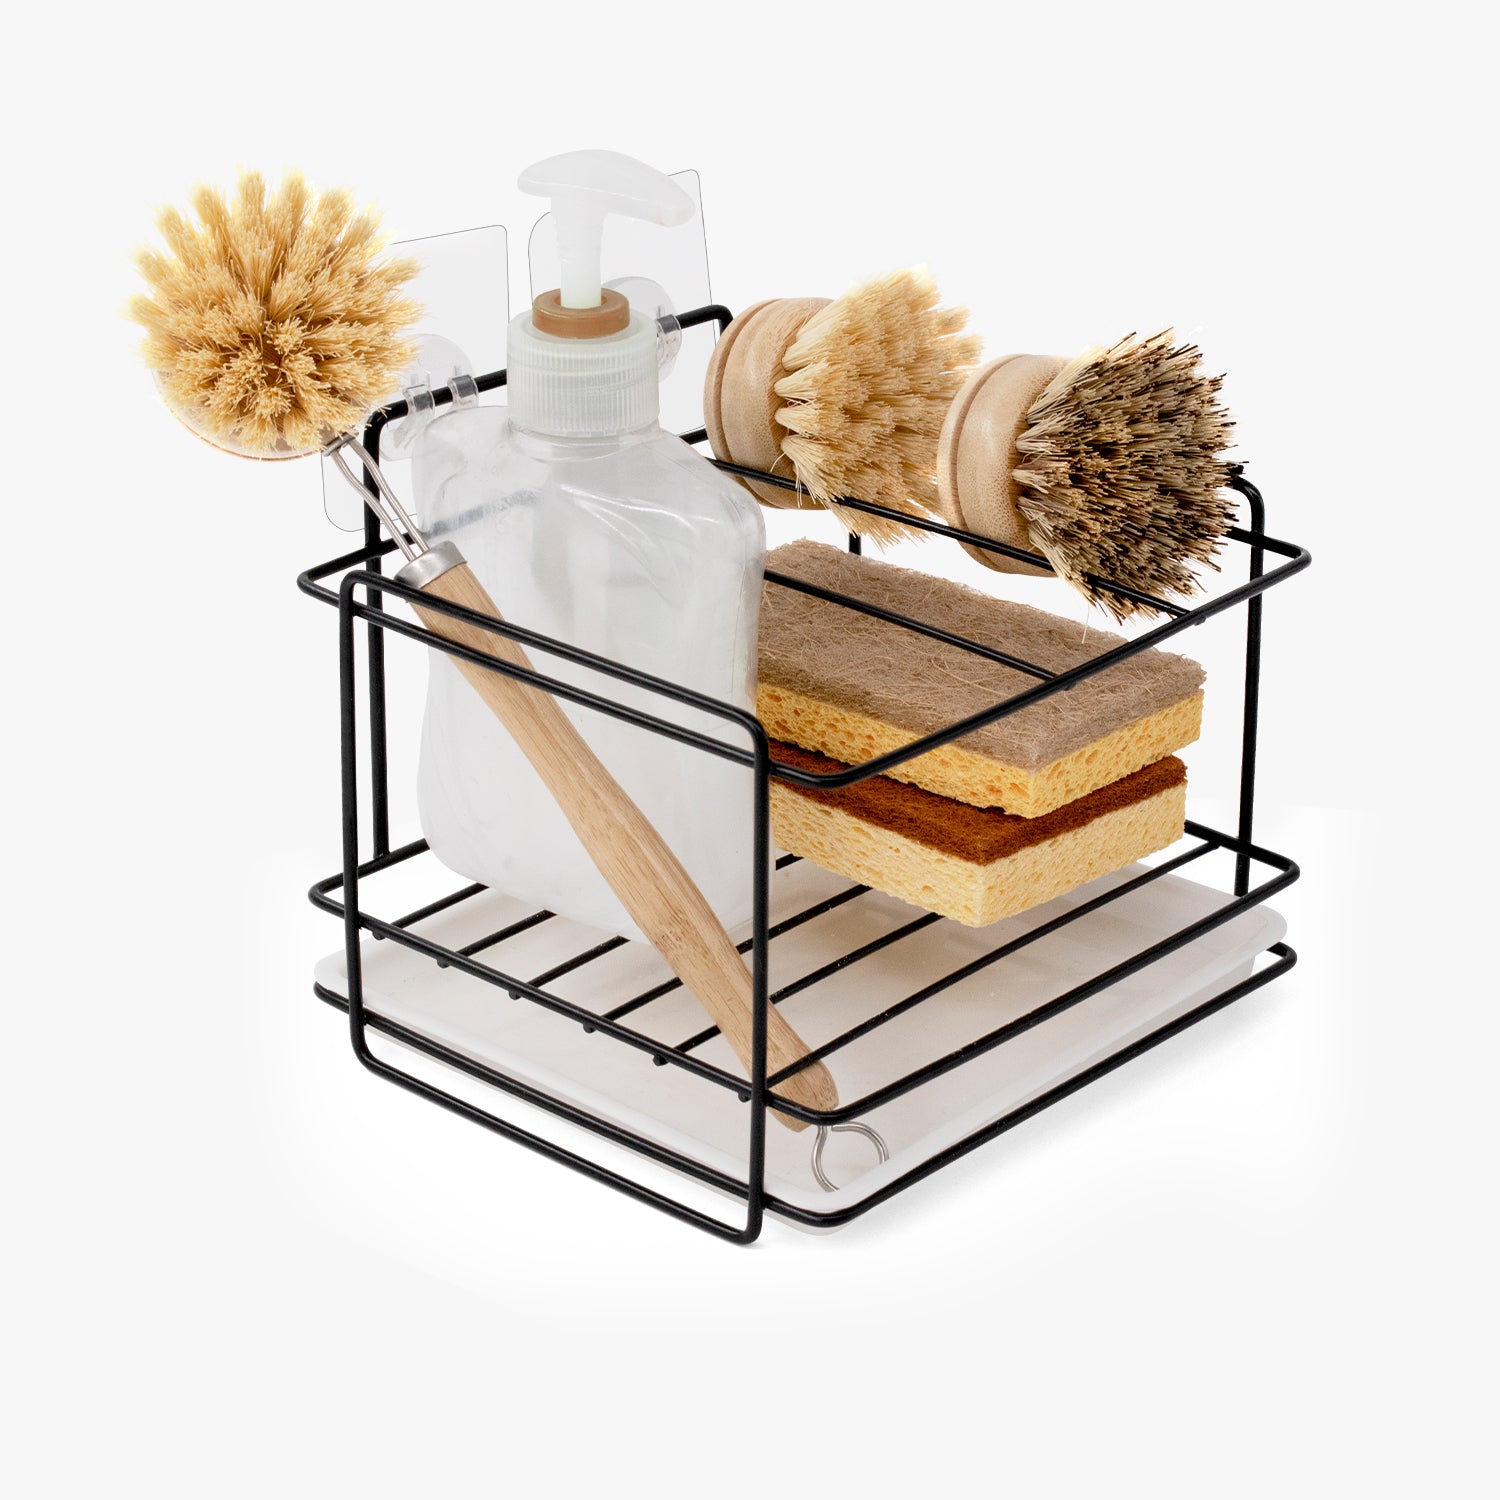 Sponge Holder for Kitchen Sink with Drip Tray - Joejis